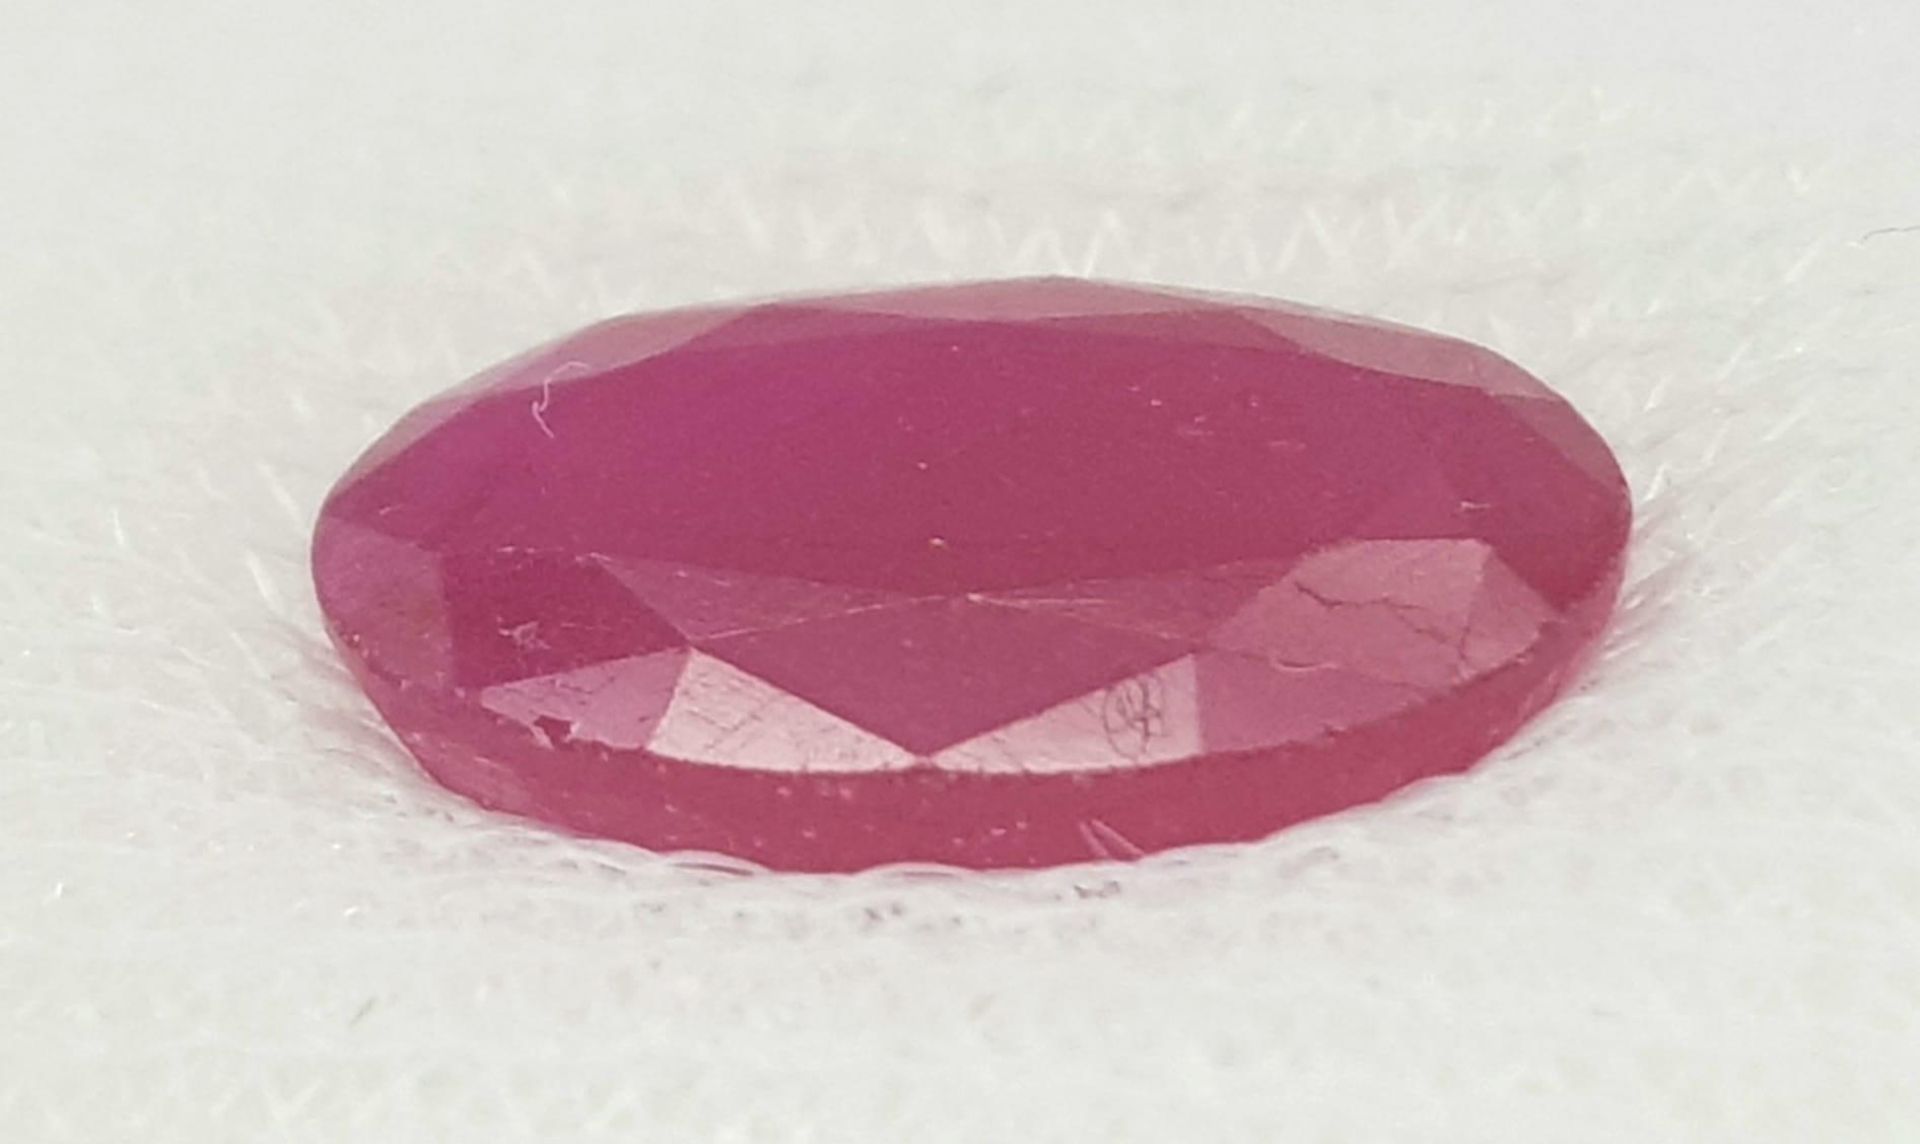 A 5.03ct Rare Burmese Ruby Gemstone - AIG certified in a sealed container.